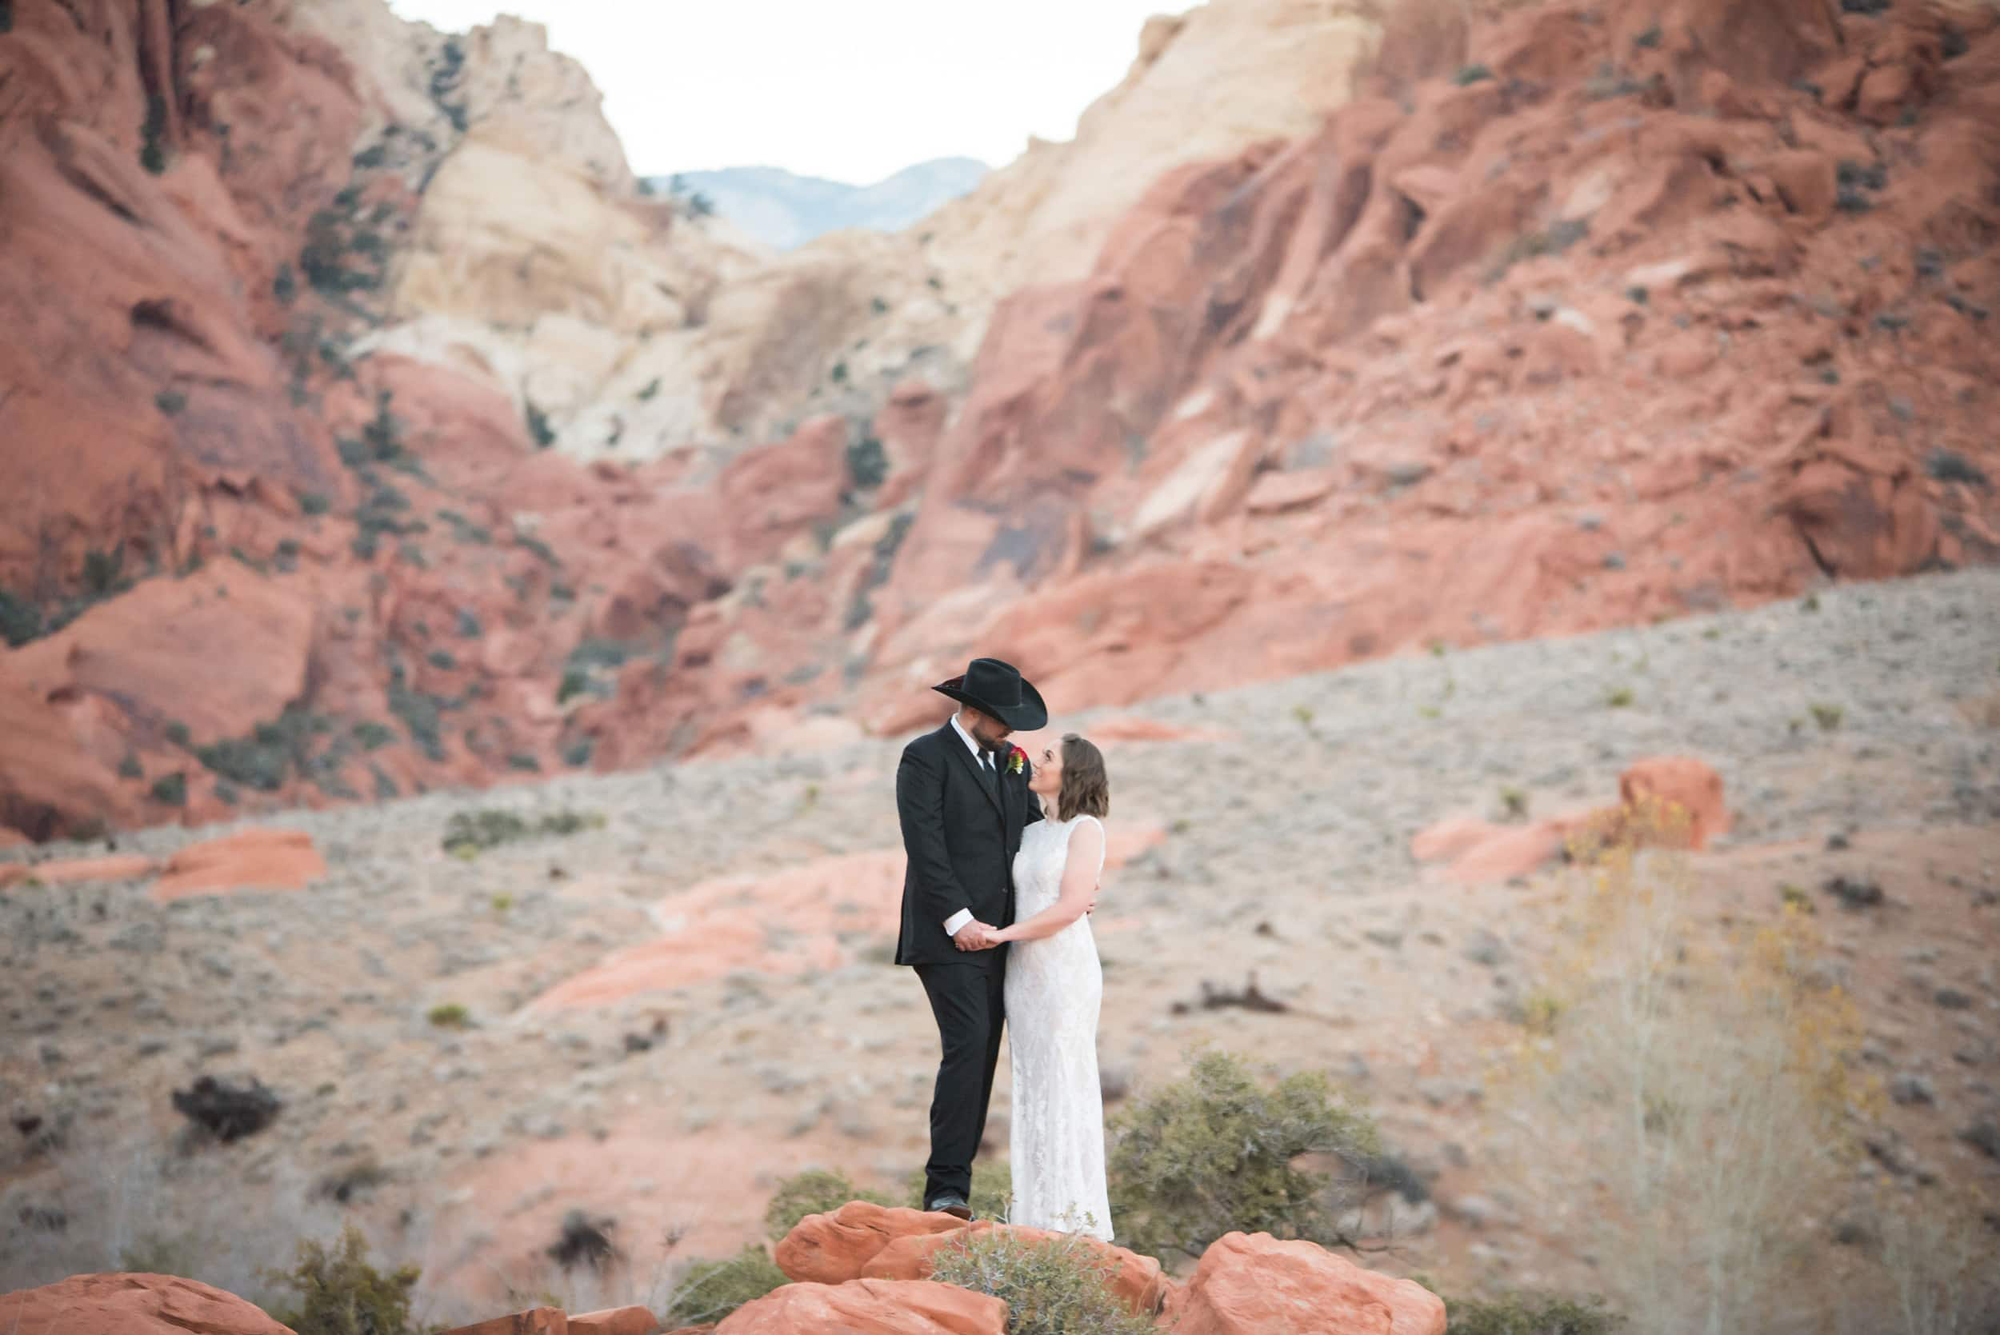 Bride and groom embracing each other in the middle of the desert at their western themed wedding.